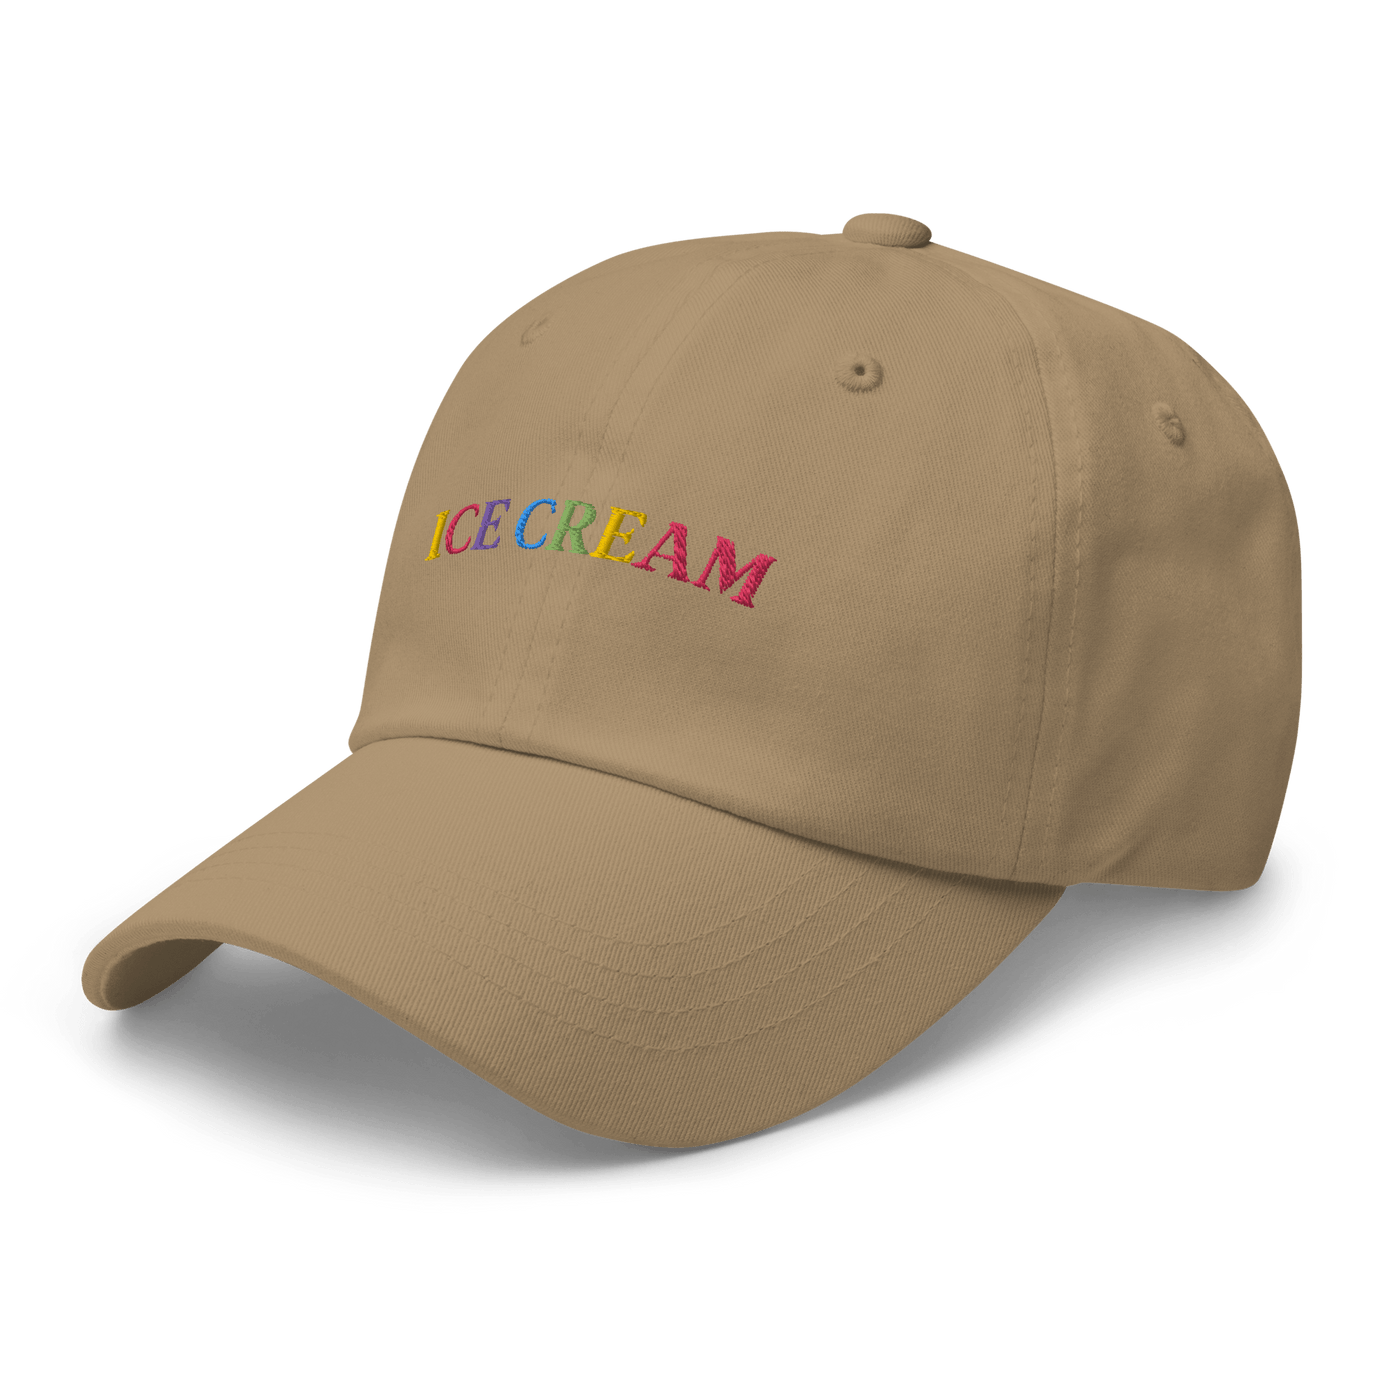 Ice Cream Text Dad hat - Khaki - - Just Another Cap Store